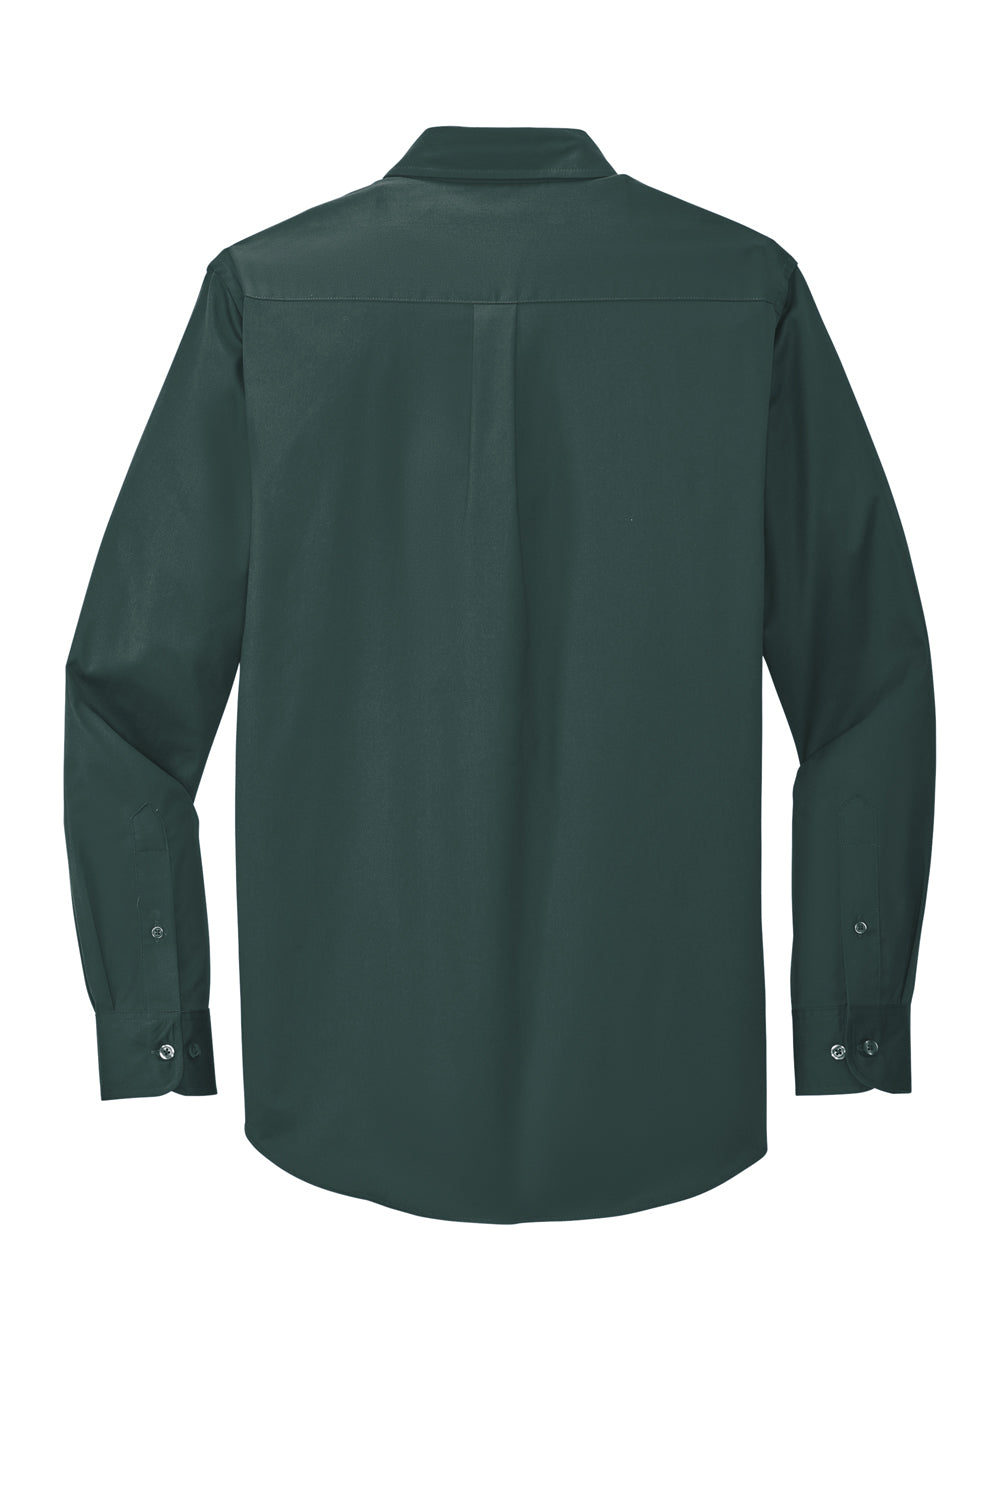 Port Authority S608/TLS608/S608ES Mens Easy Care Wrinkle Resistant Long Sleeve Button Down Shirt w/ Pocket Dark Green Flat Back